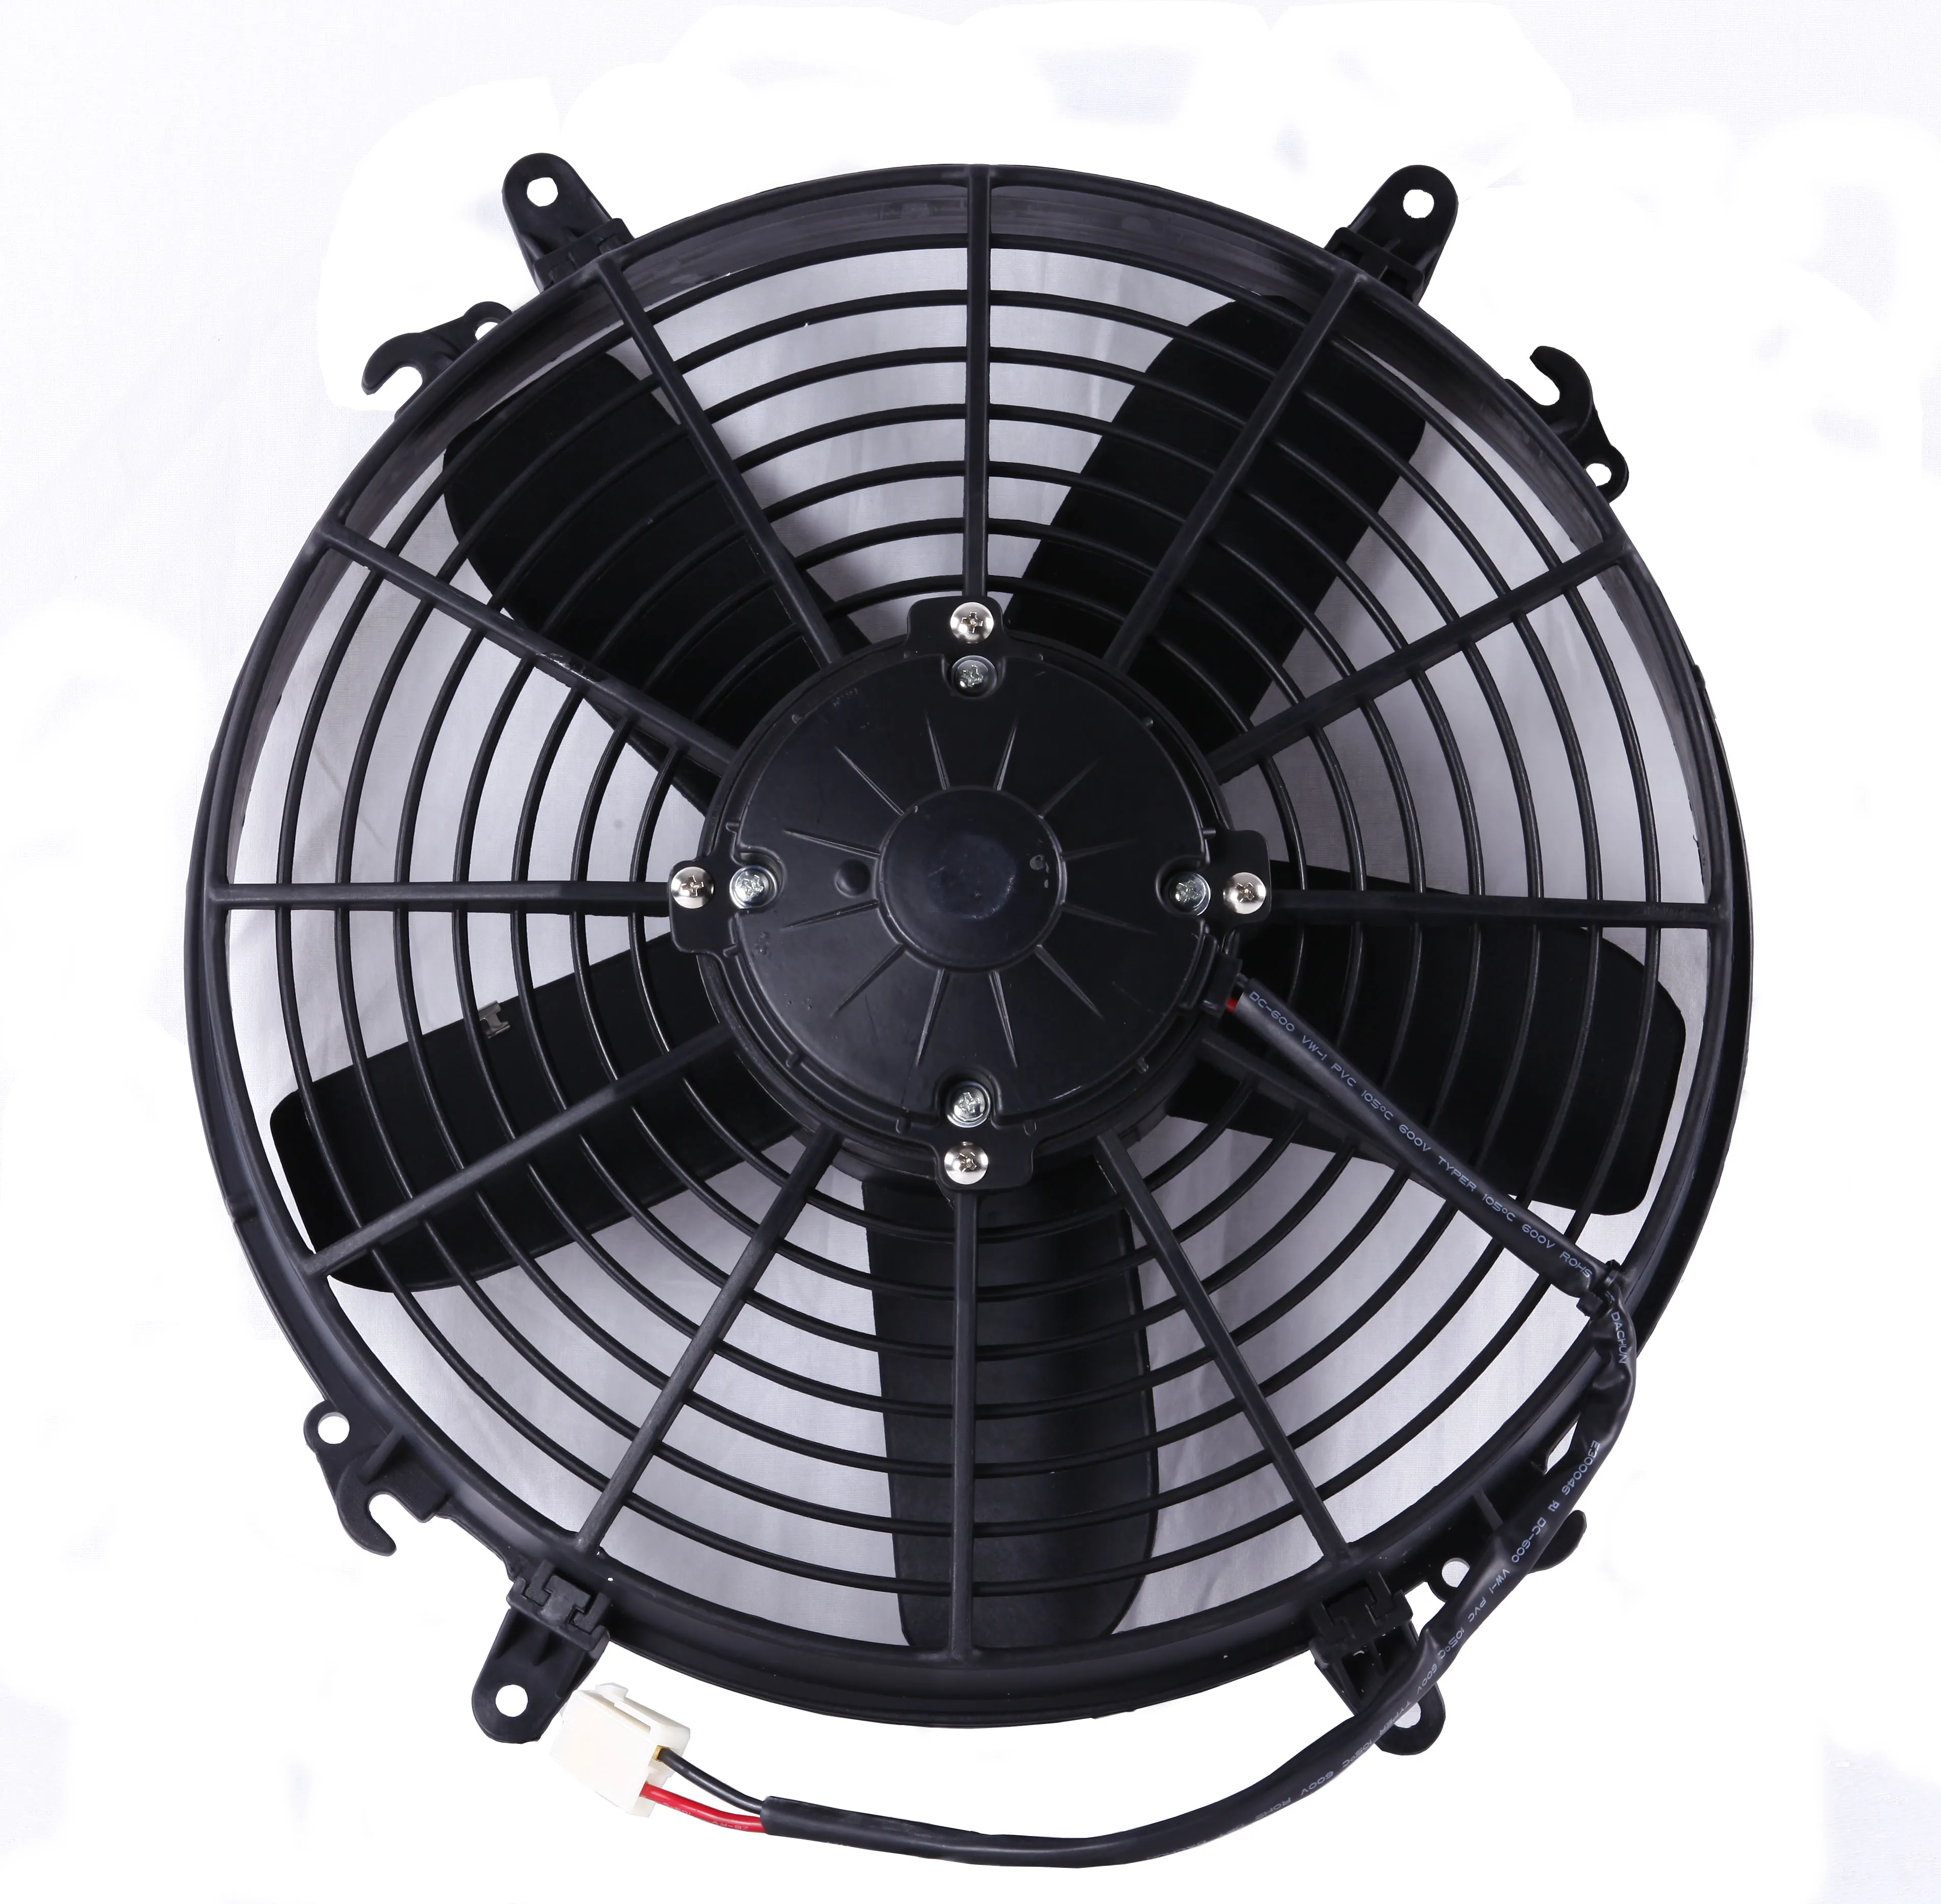 12V and 24V DC brush motor axial fan replace spal VA01 series for bus condenser fan push and pull from China manufacture